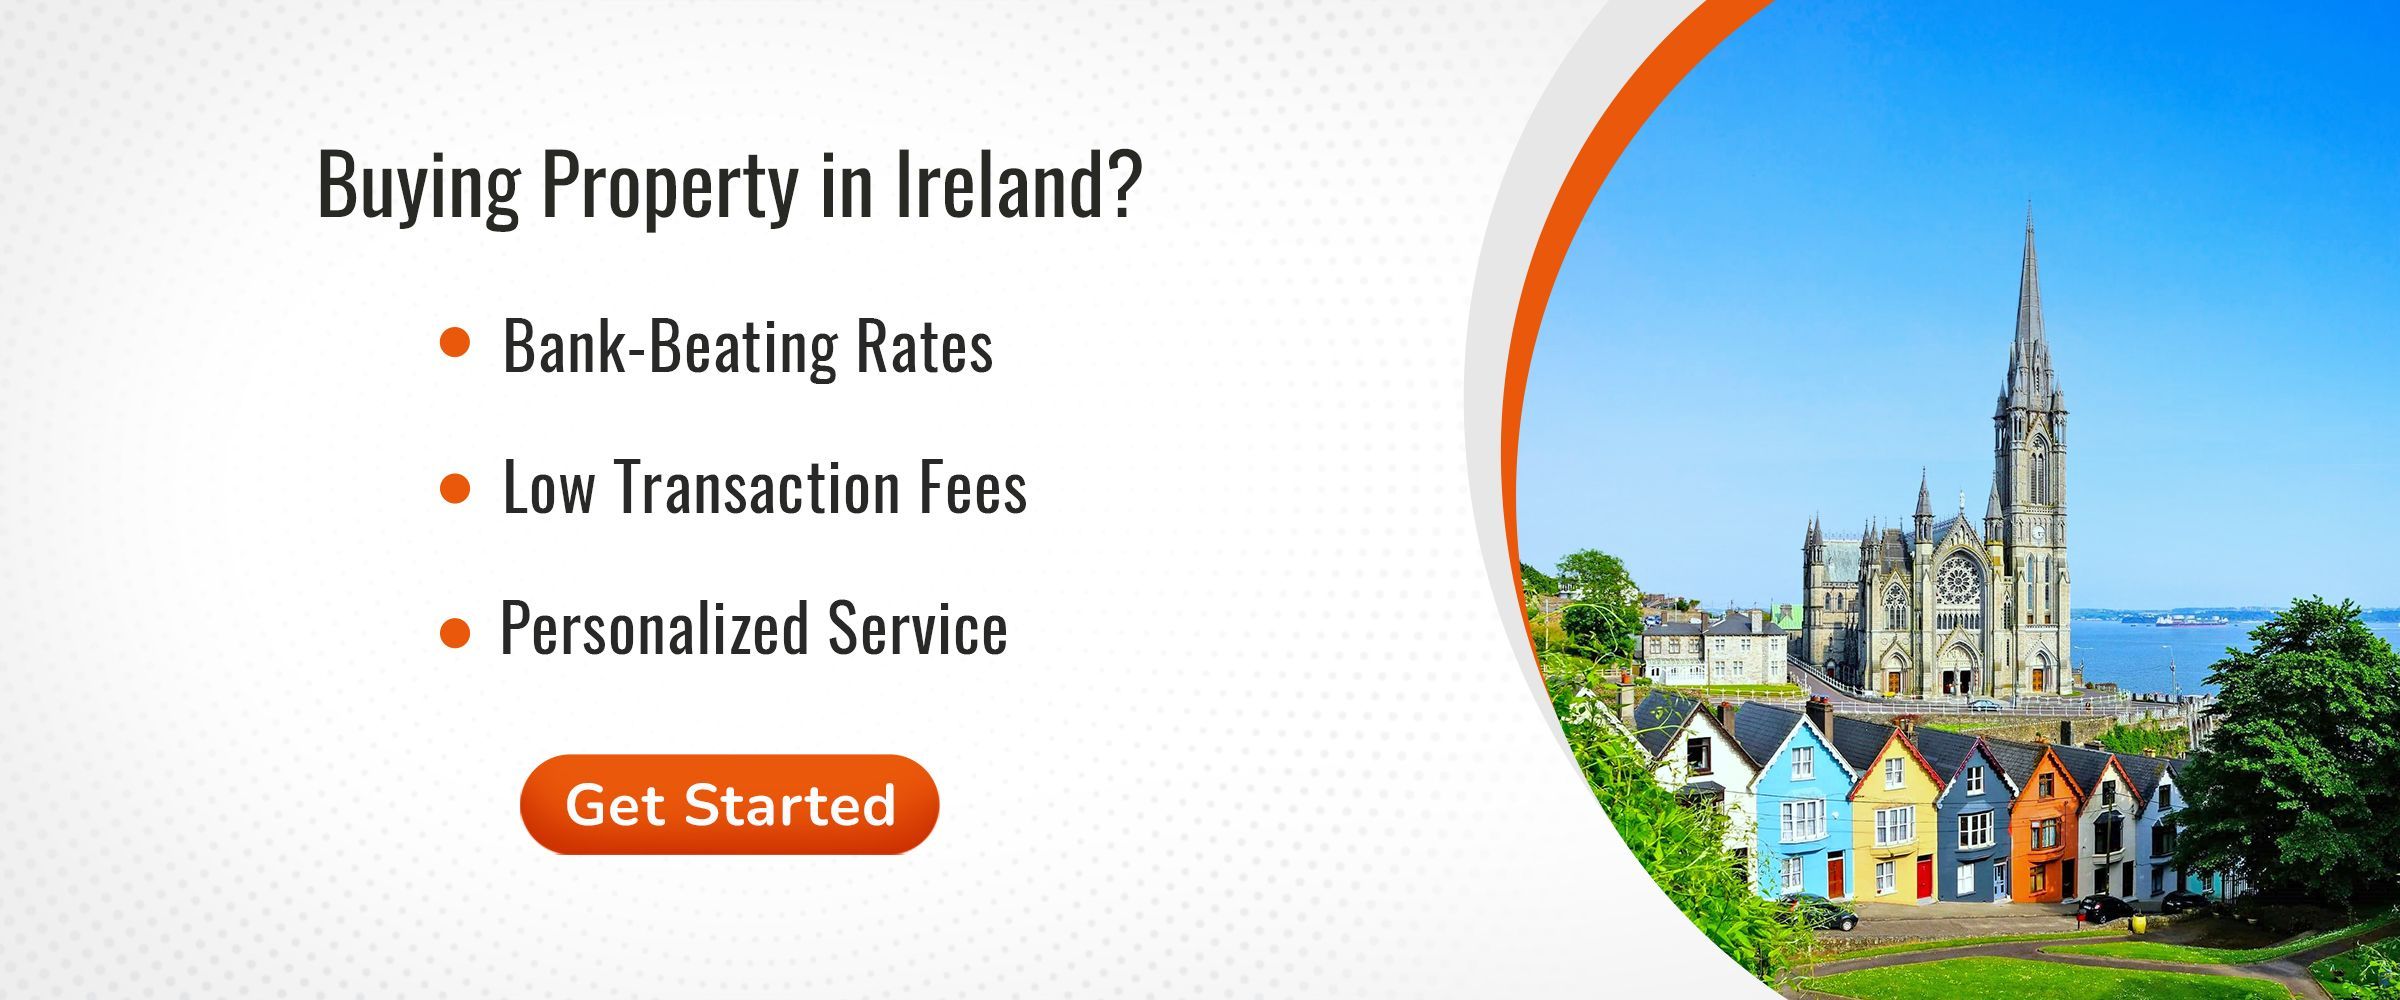 Buying Property in Ireland: A Guide for Canadians